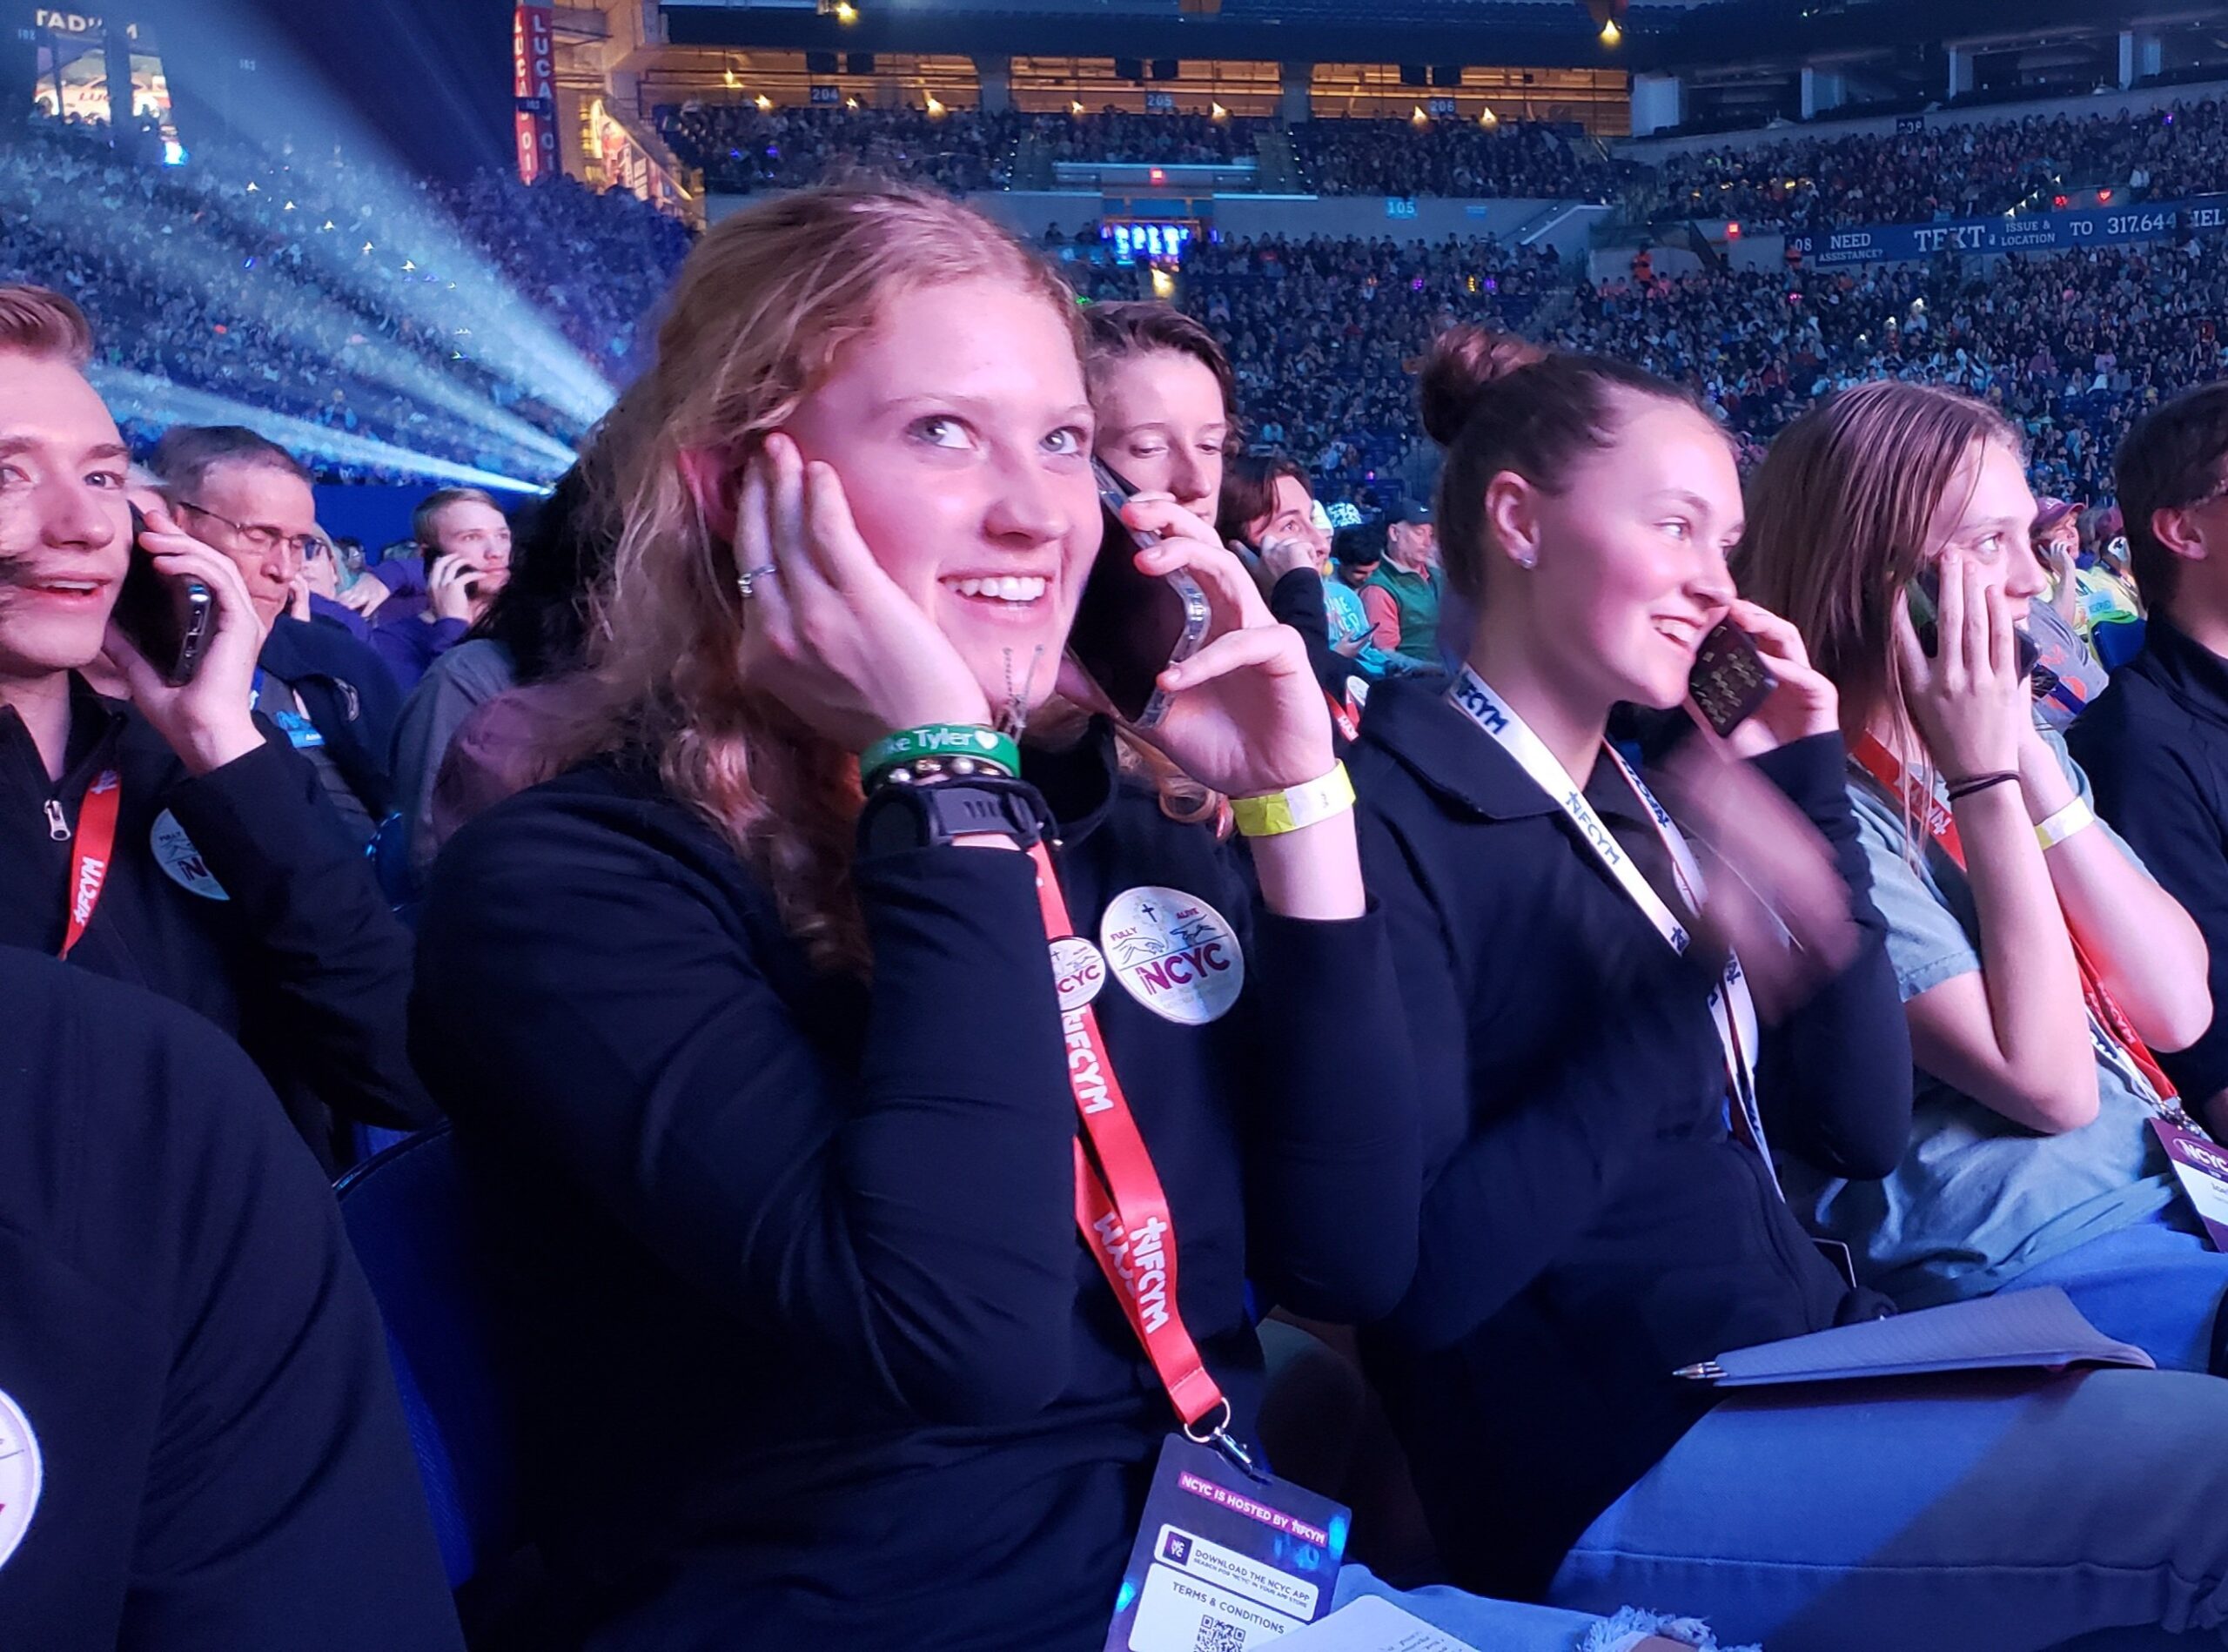 Grace Stacker of the Diocese of Helena, Mont., and those around her call a loved one (for Grace, her dad), as an exercise during the opening session of the National Catholic Youth Conference in Lucas Oil Stadium in Indianapolis on Nov. 16. (OSV News photo/Natalie Hoefer, The Criterion)